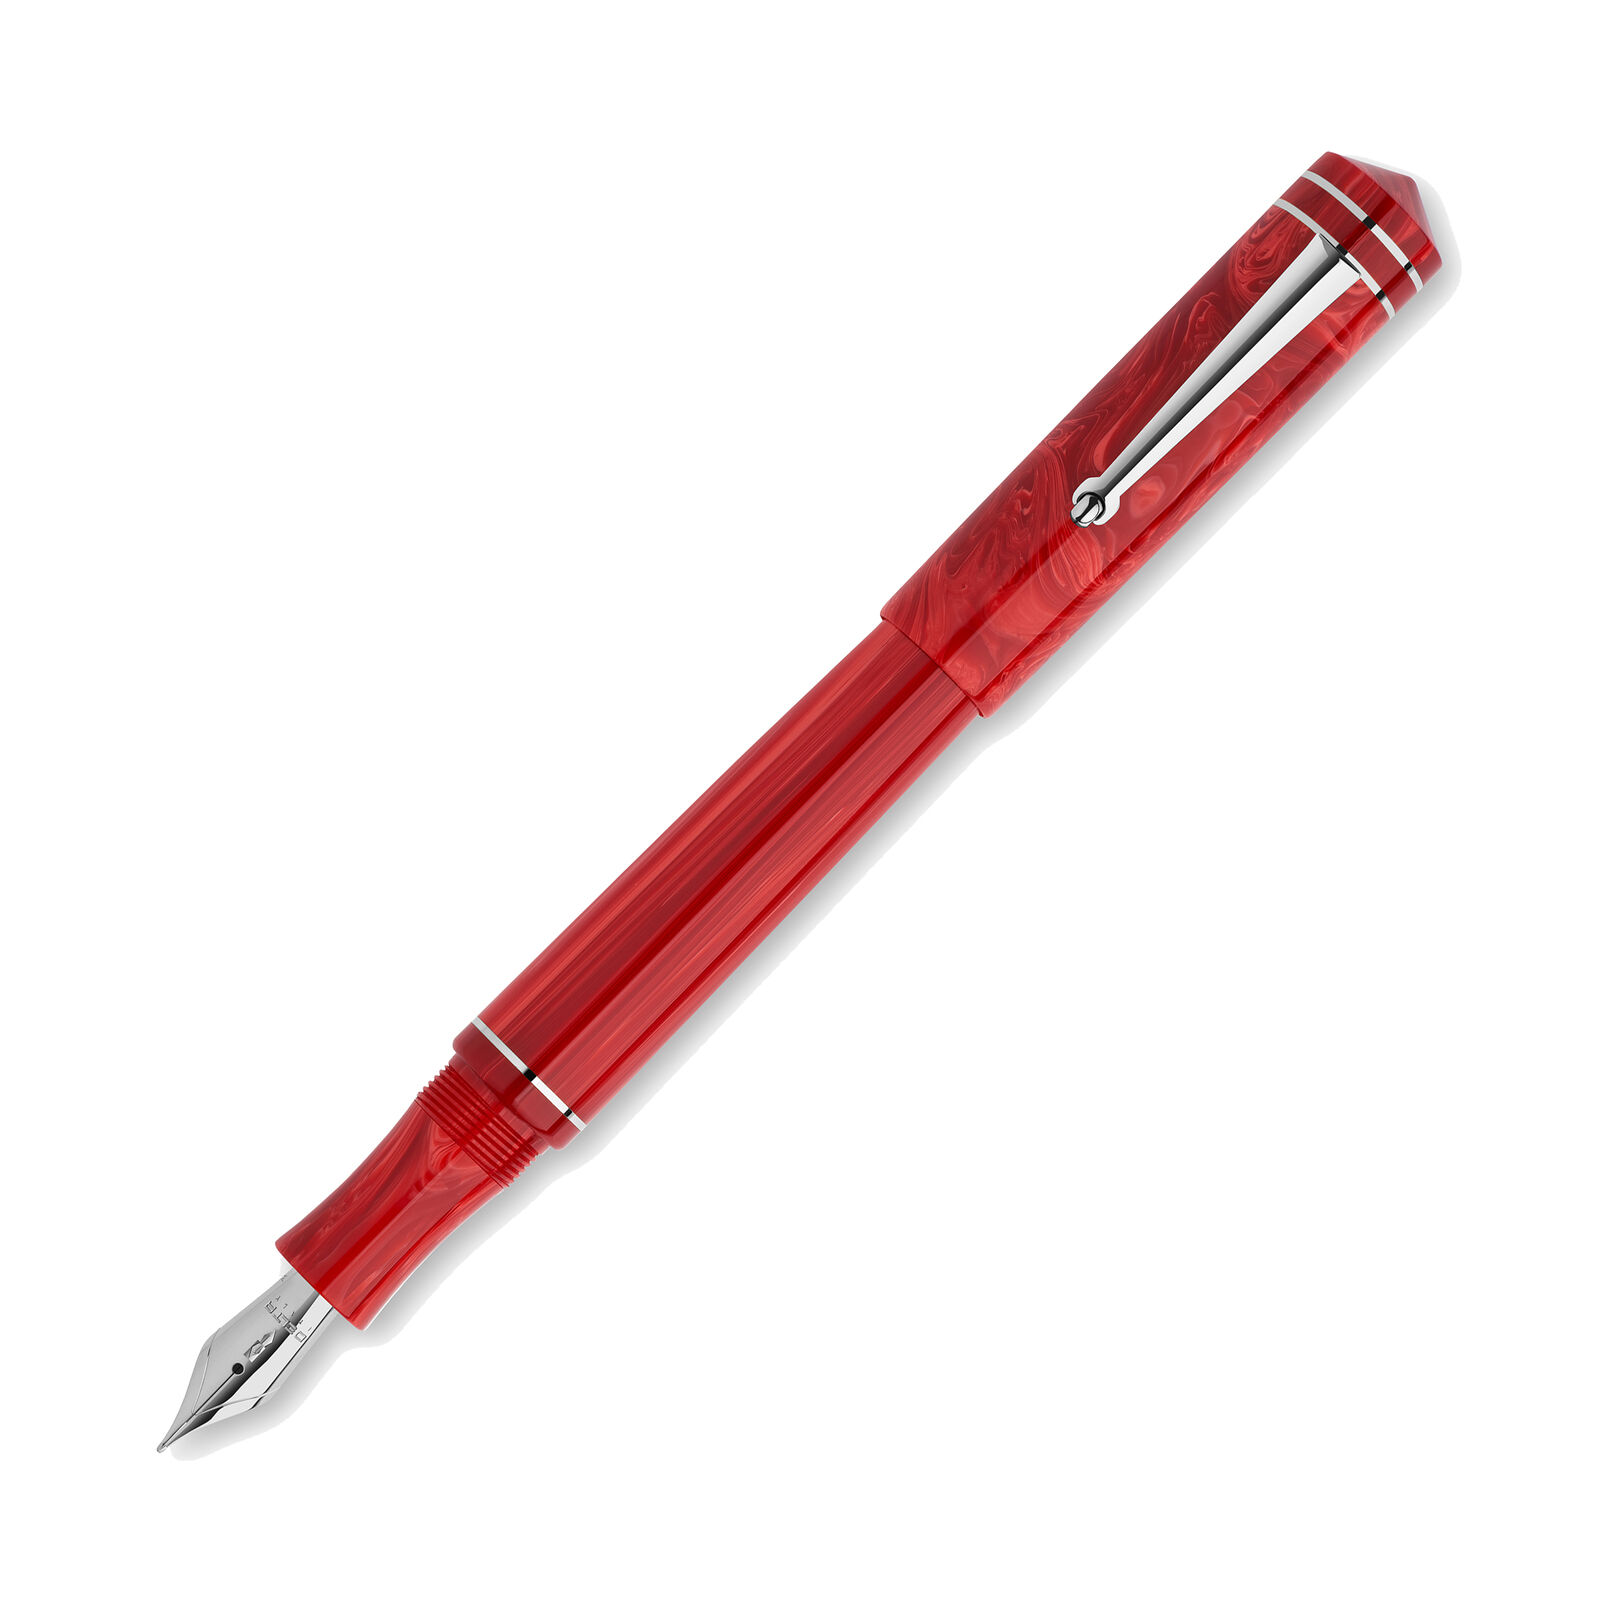 Delta Write Balance Fountain Pen in Red - Extra Fine Point - NEW in Box